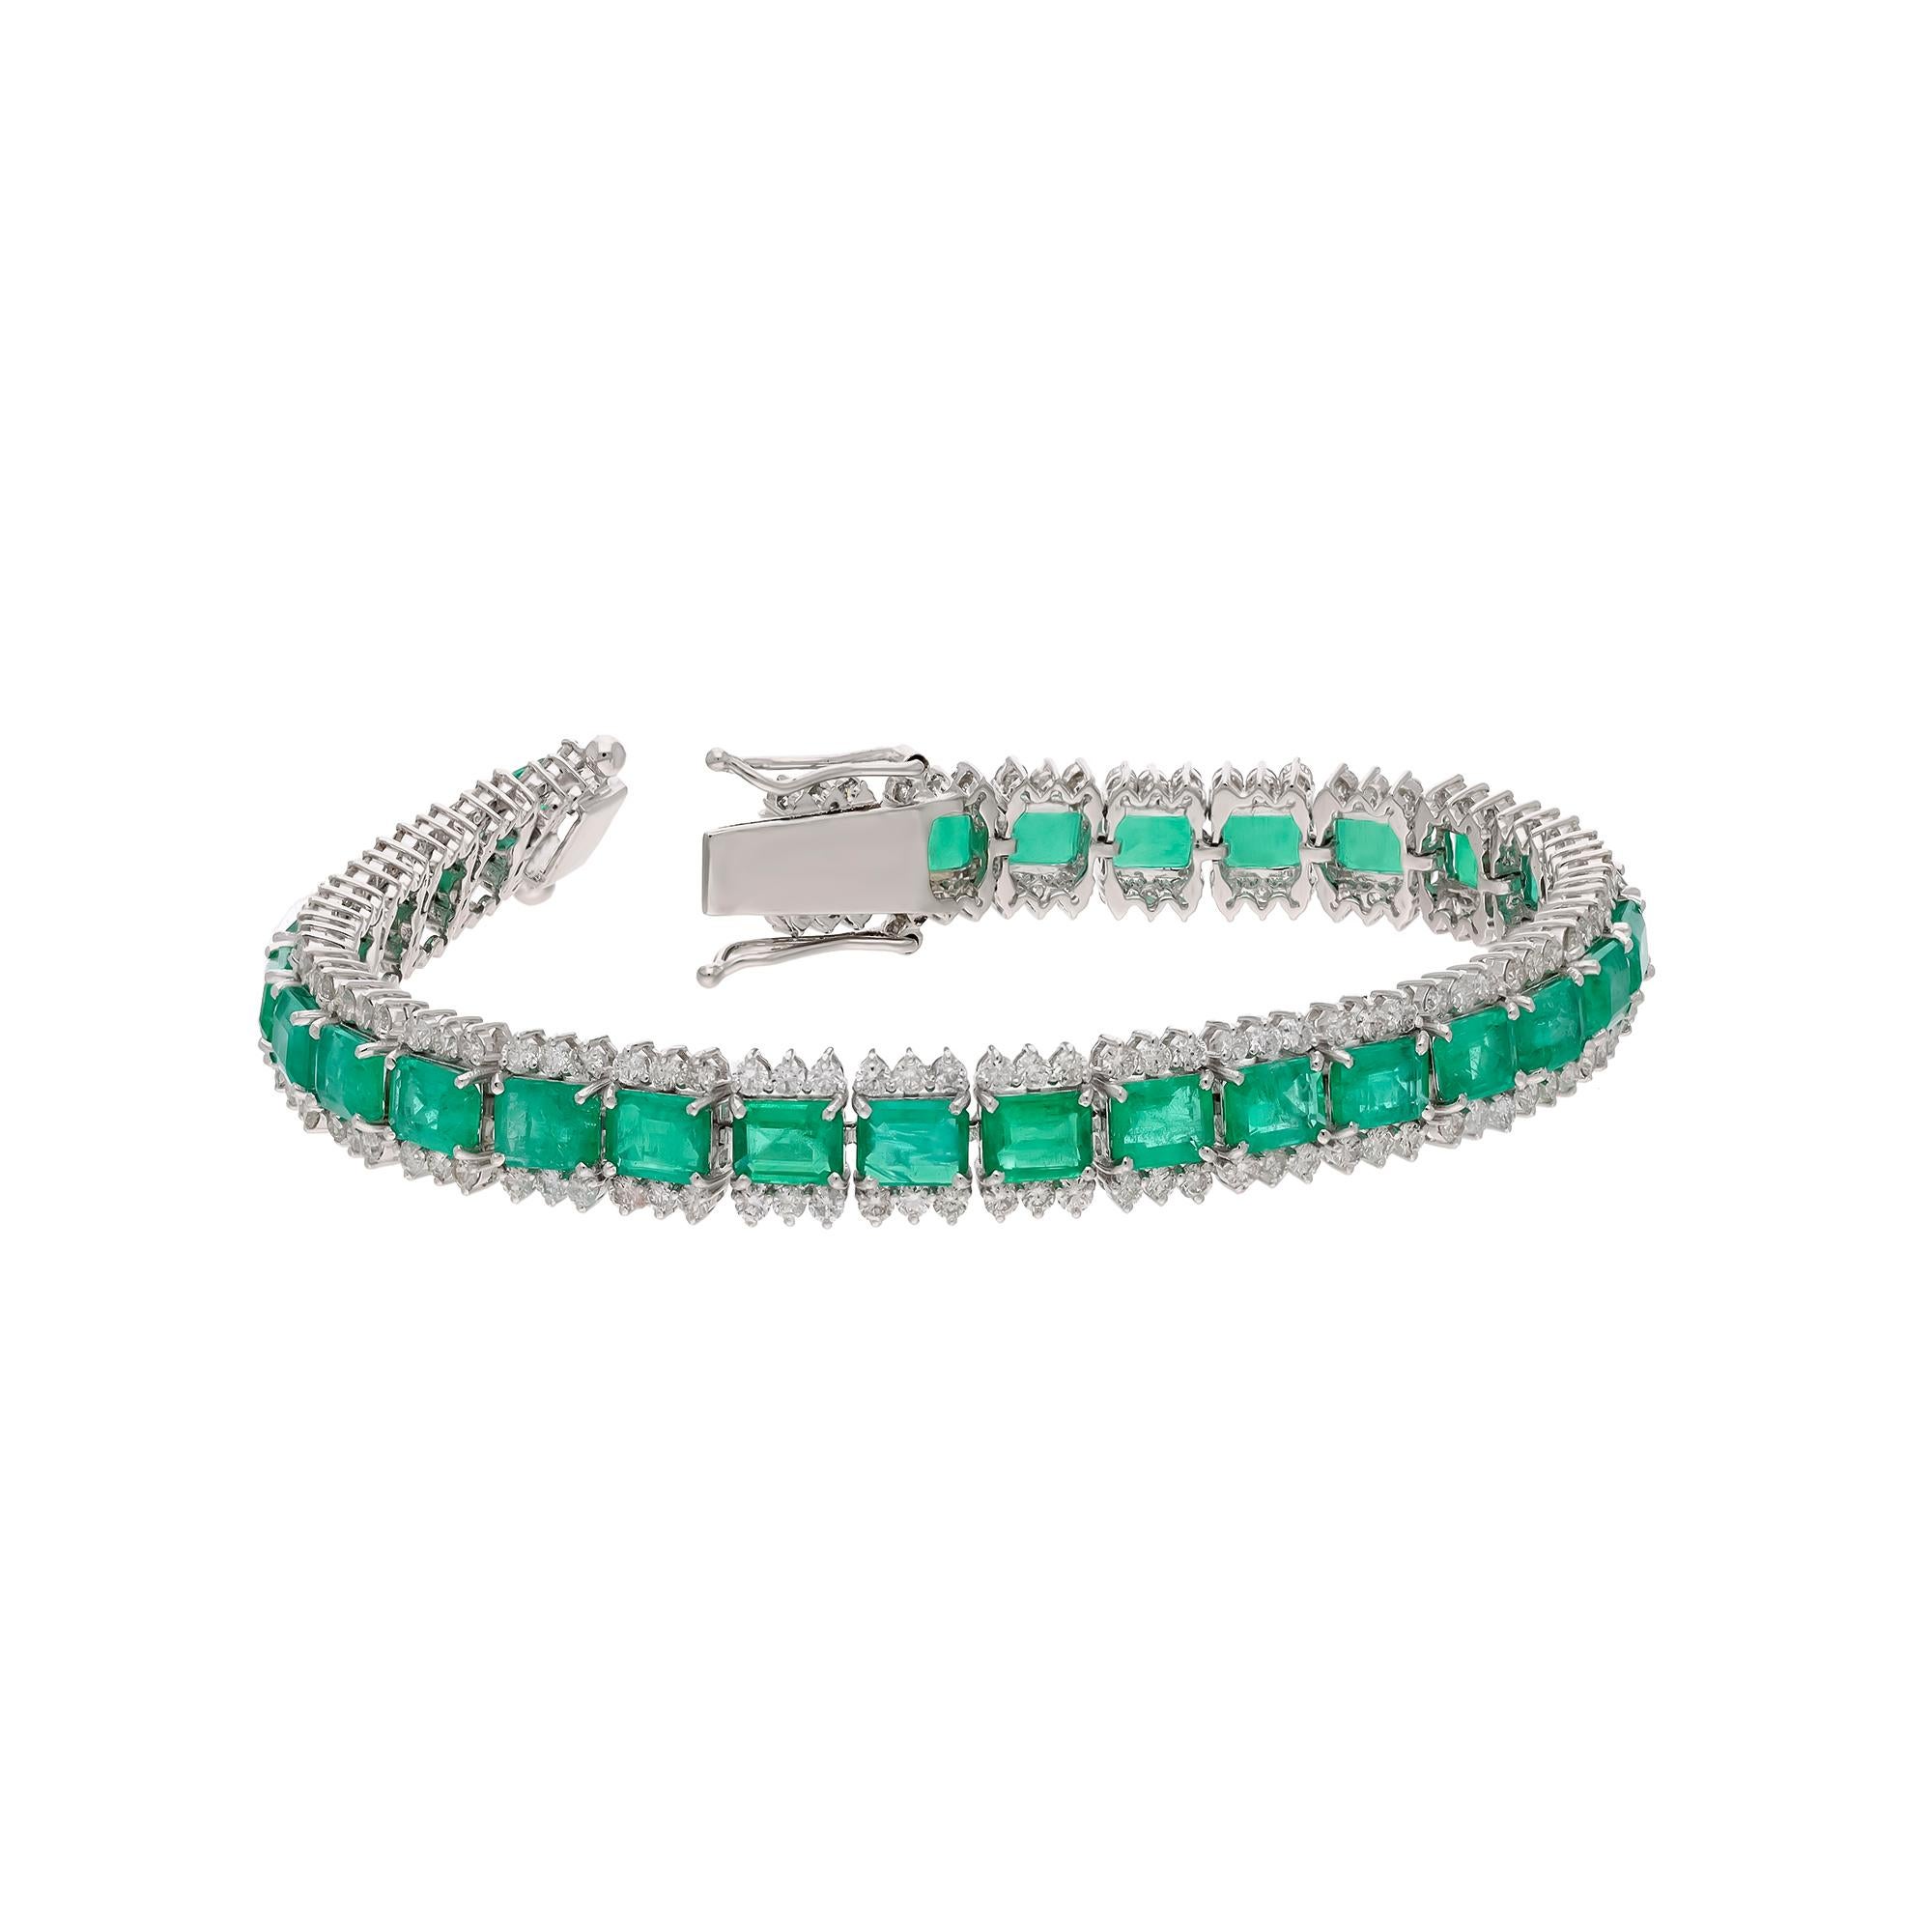 This is a natural Zambian Emerald bracelet with diamonds and 18k gold. The emeralds are very high quality and very good quality diamonds the clarity is vsi and G colour


Emeralds : 12.46 carats
diamonds : 3.25 carats
gold : 14.65 gm

This is a